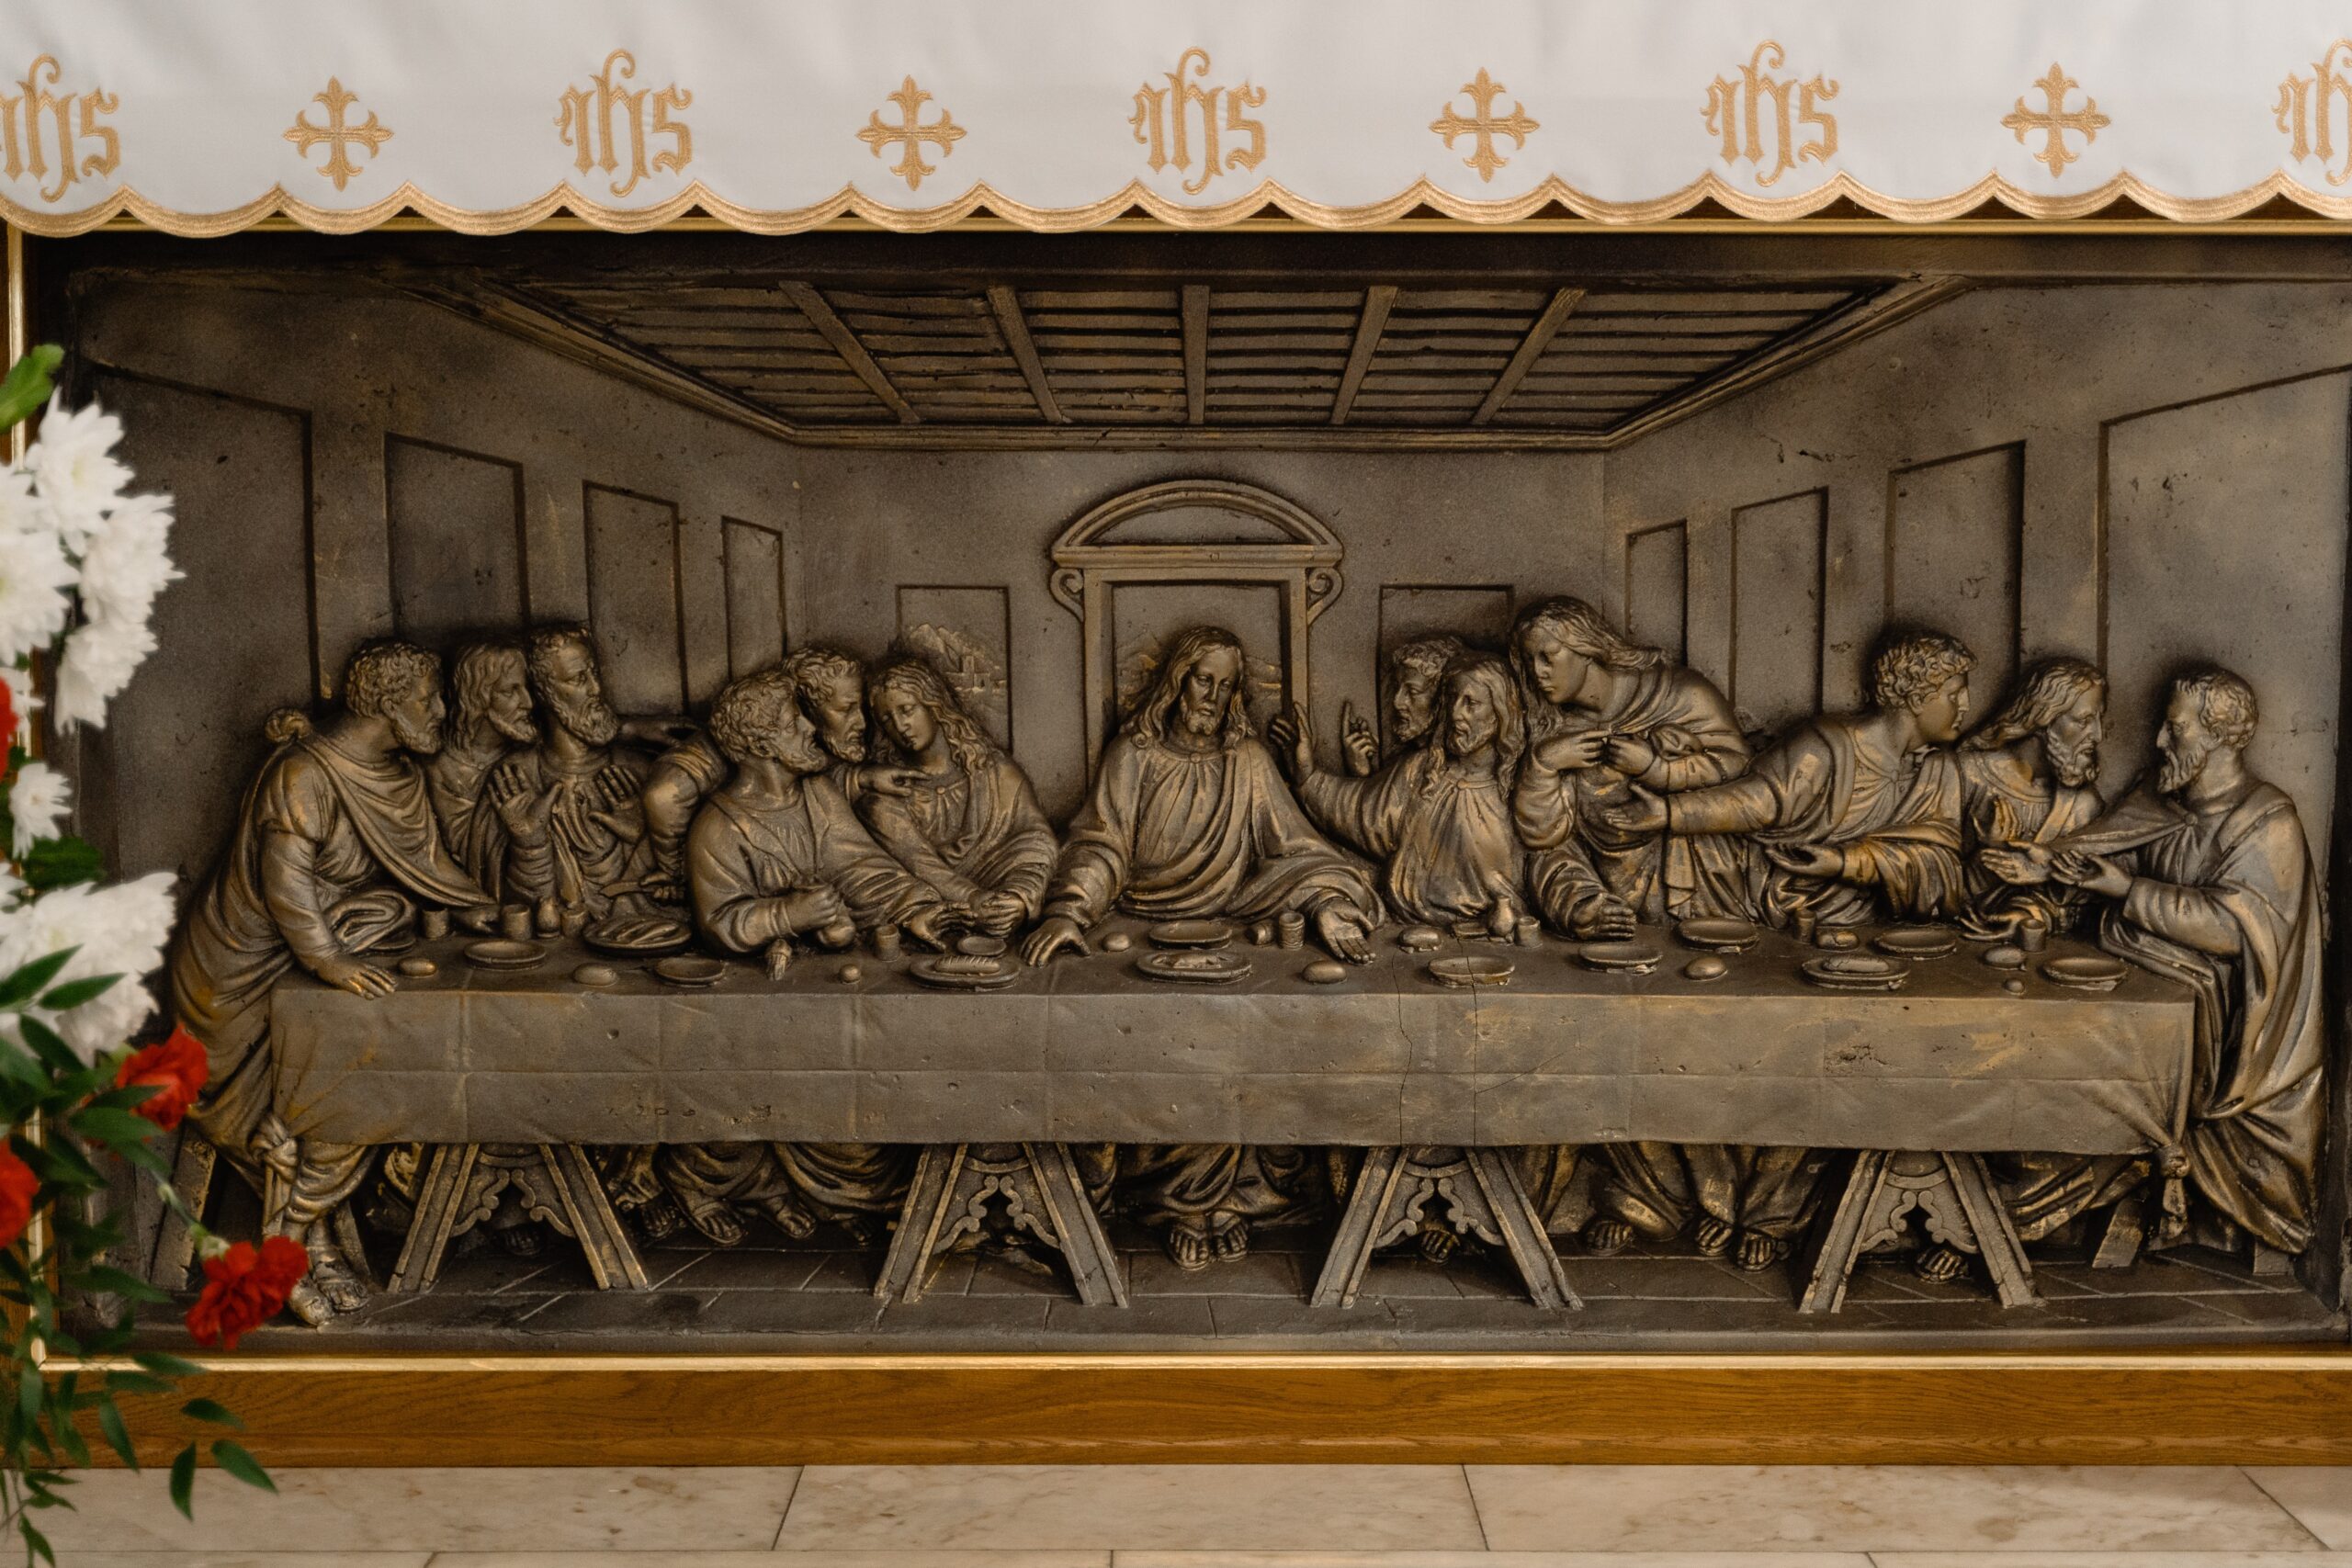 Easter Reflection – Day 7